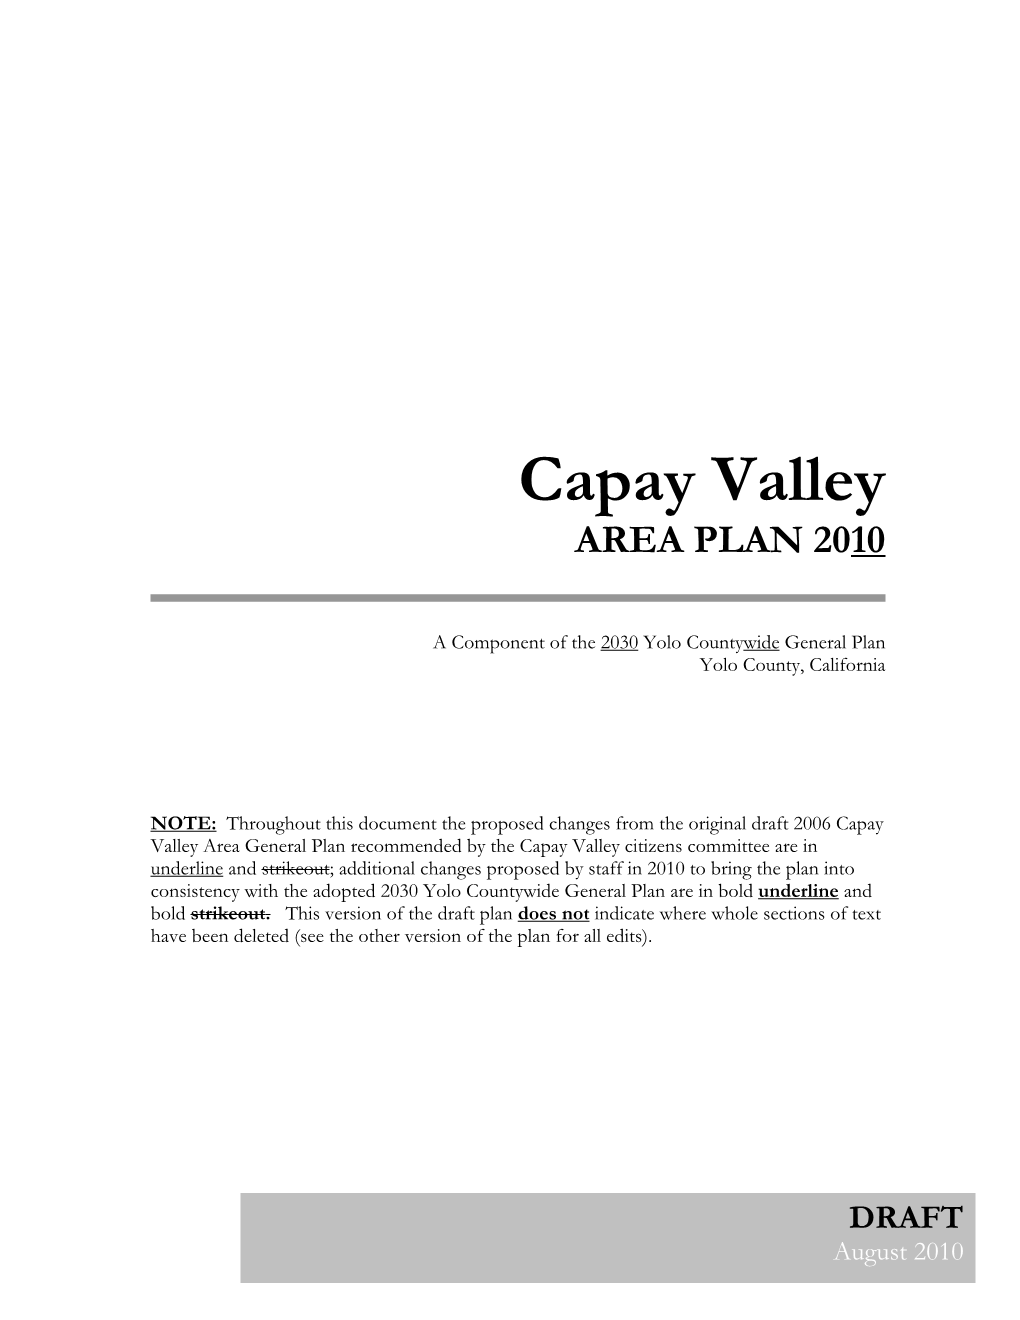 Capay Valley AREA PLAN 2010